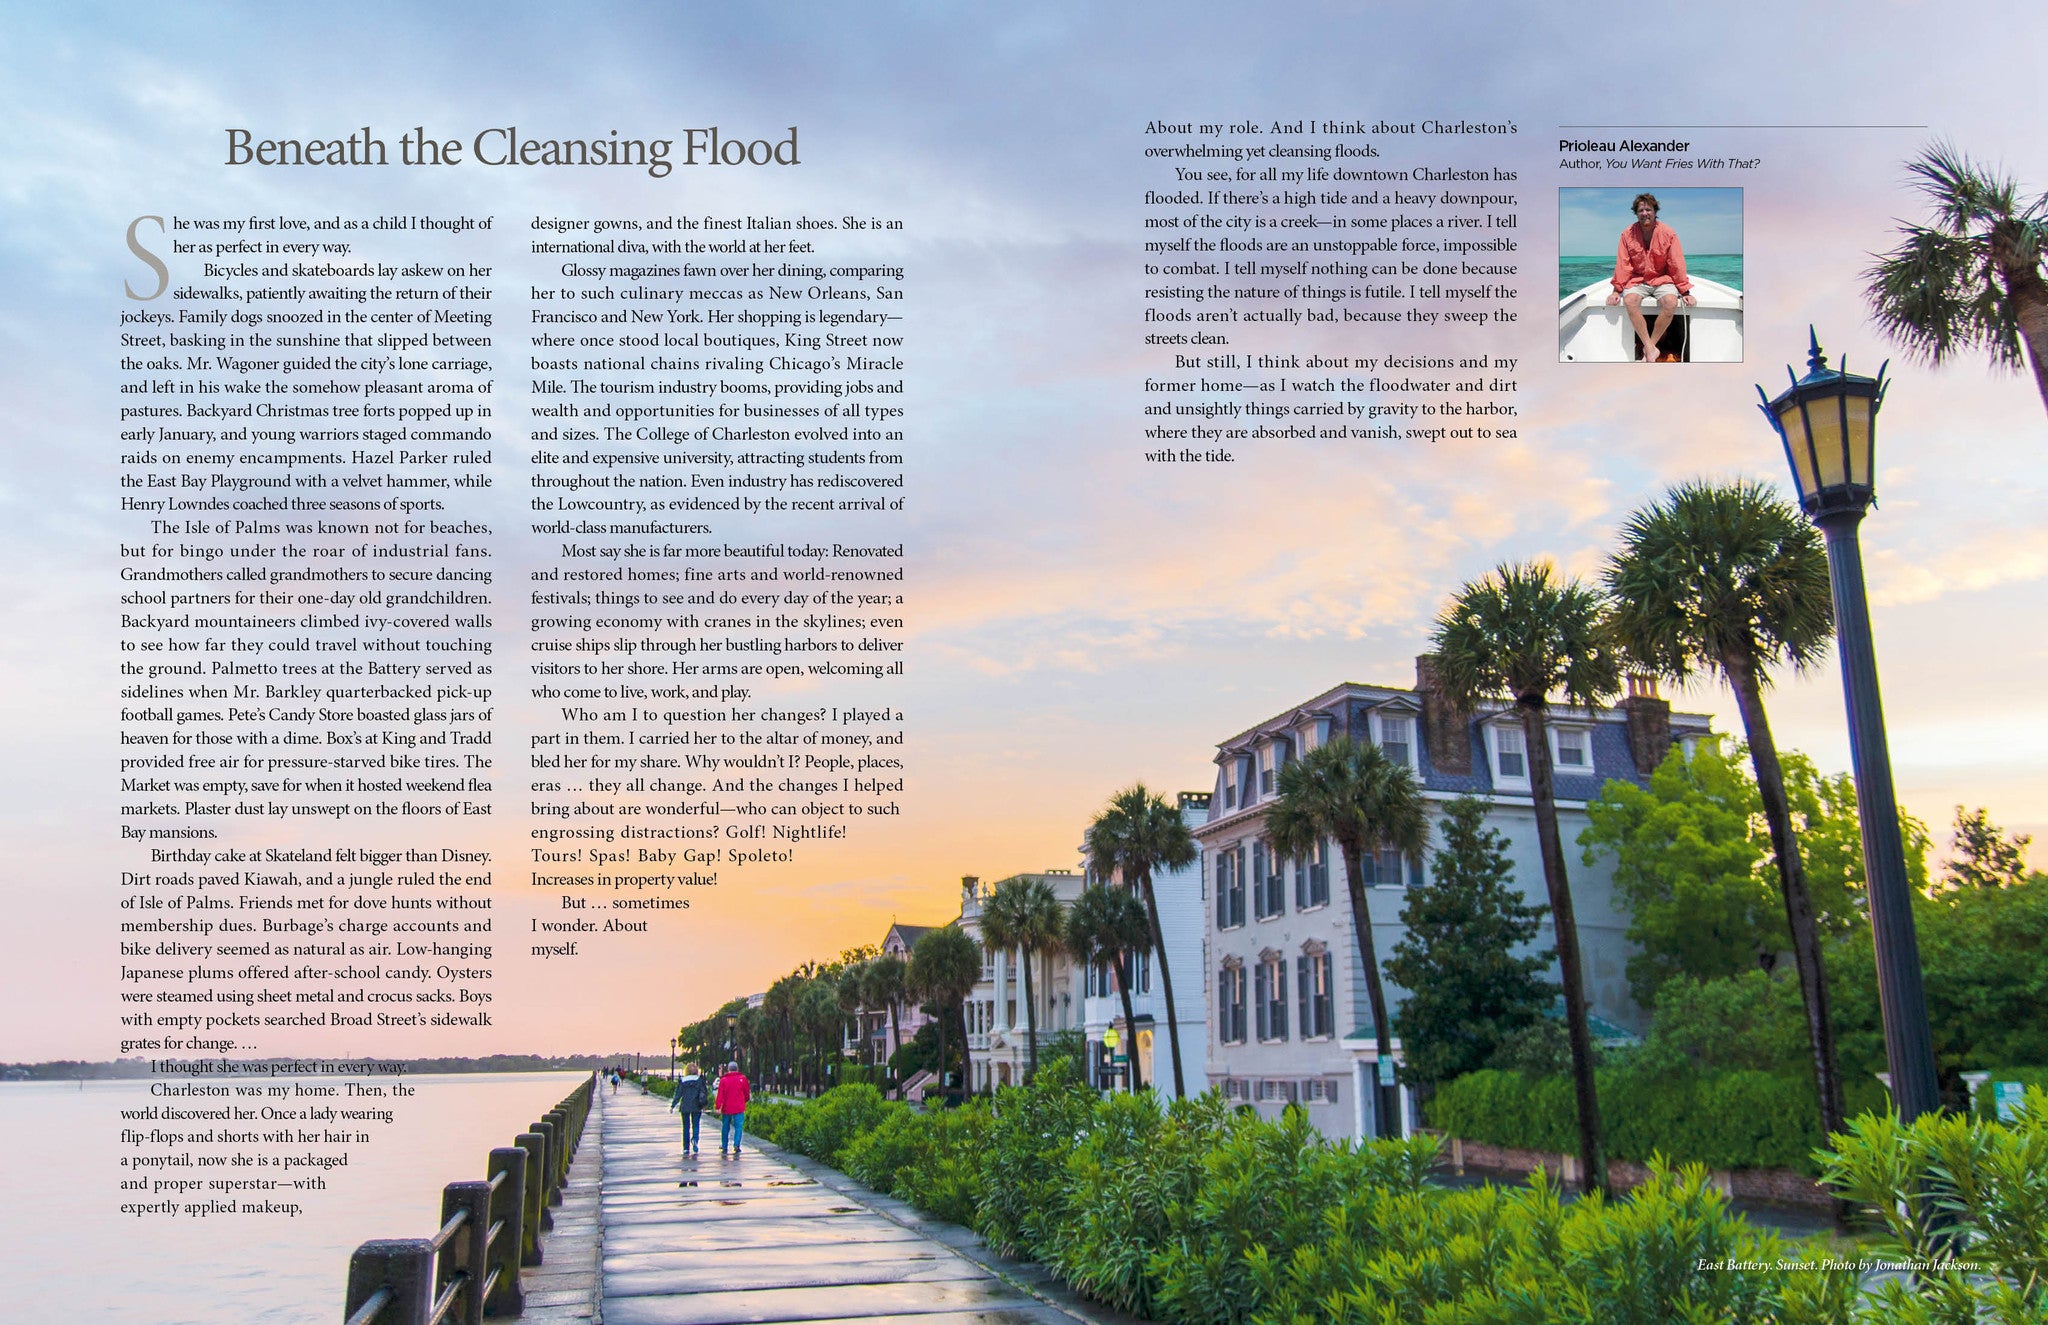 Story: Beneath the Cleansing Flood by Prioleau Alexander from Charleston Salt and Iron book Starbooks